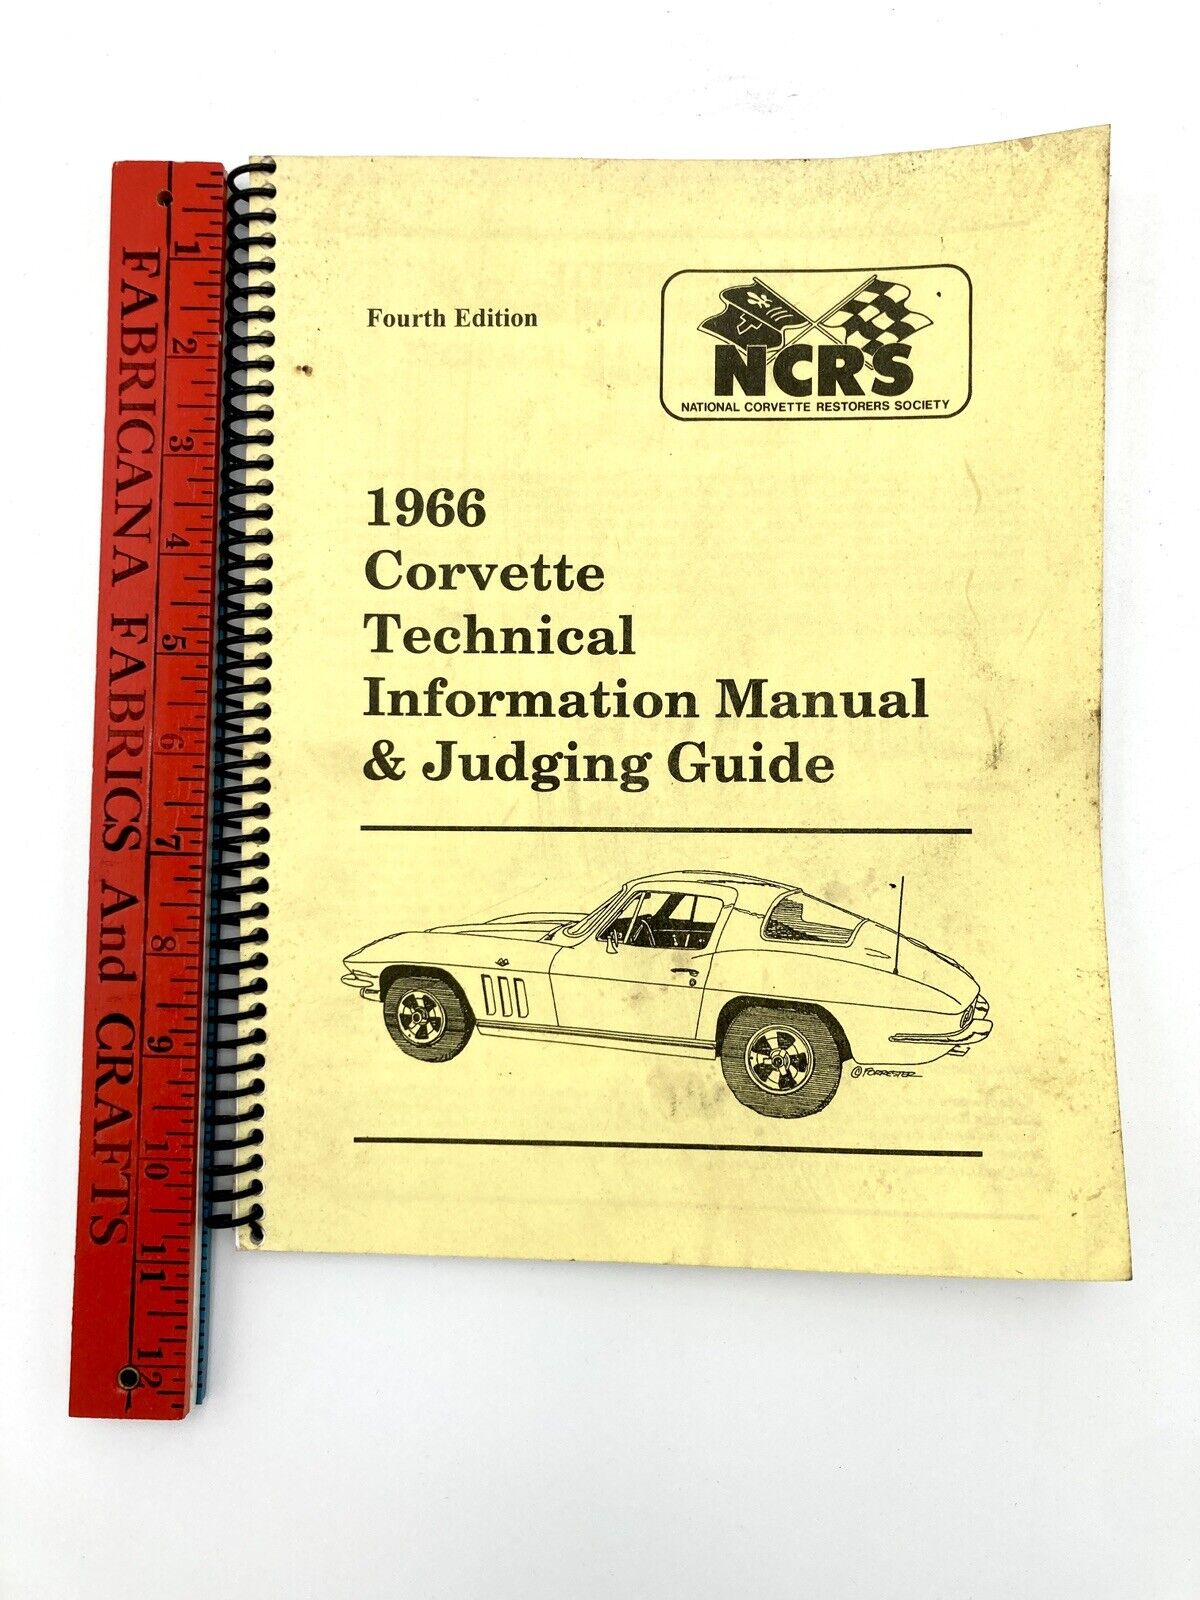 1966 Chevrolet Corvette NCRS Technical Information Manual & Judging Guide 2004 4